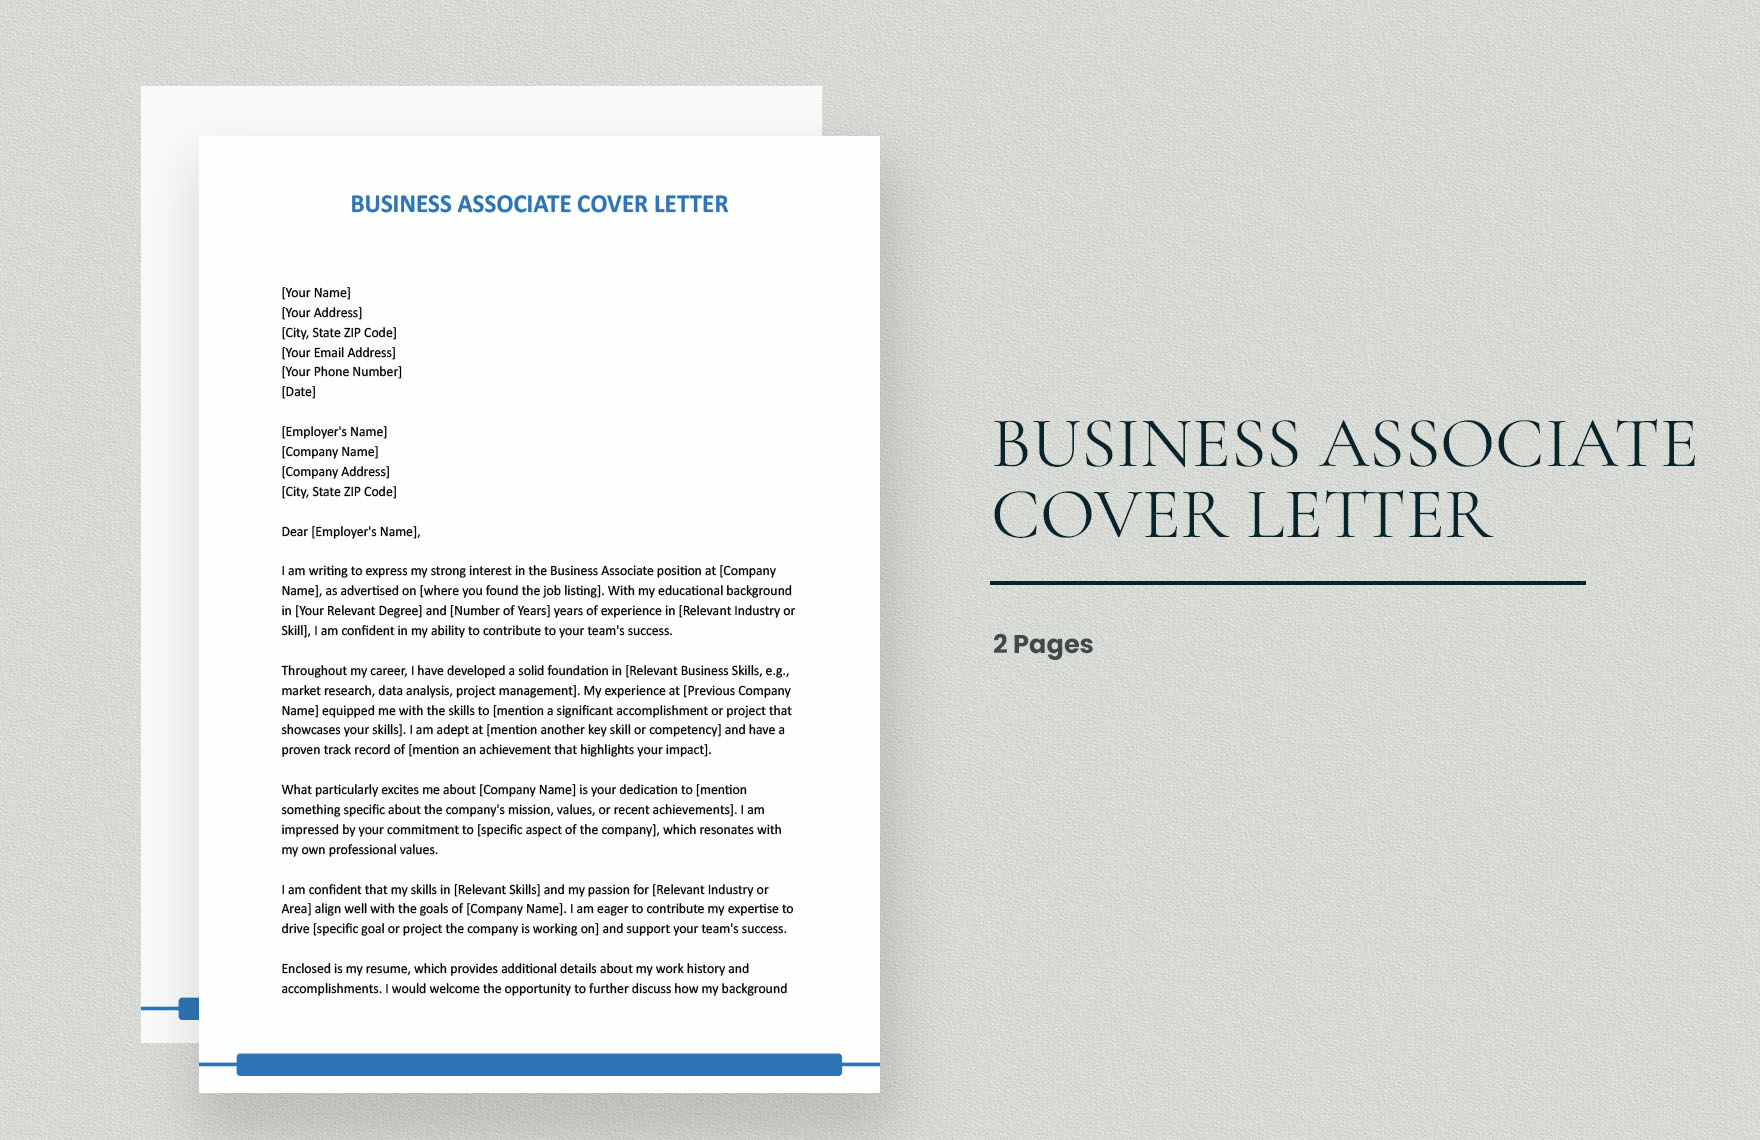 Business Associate Cover Letter in Word, Google Docs, Apple Pages